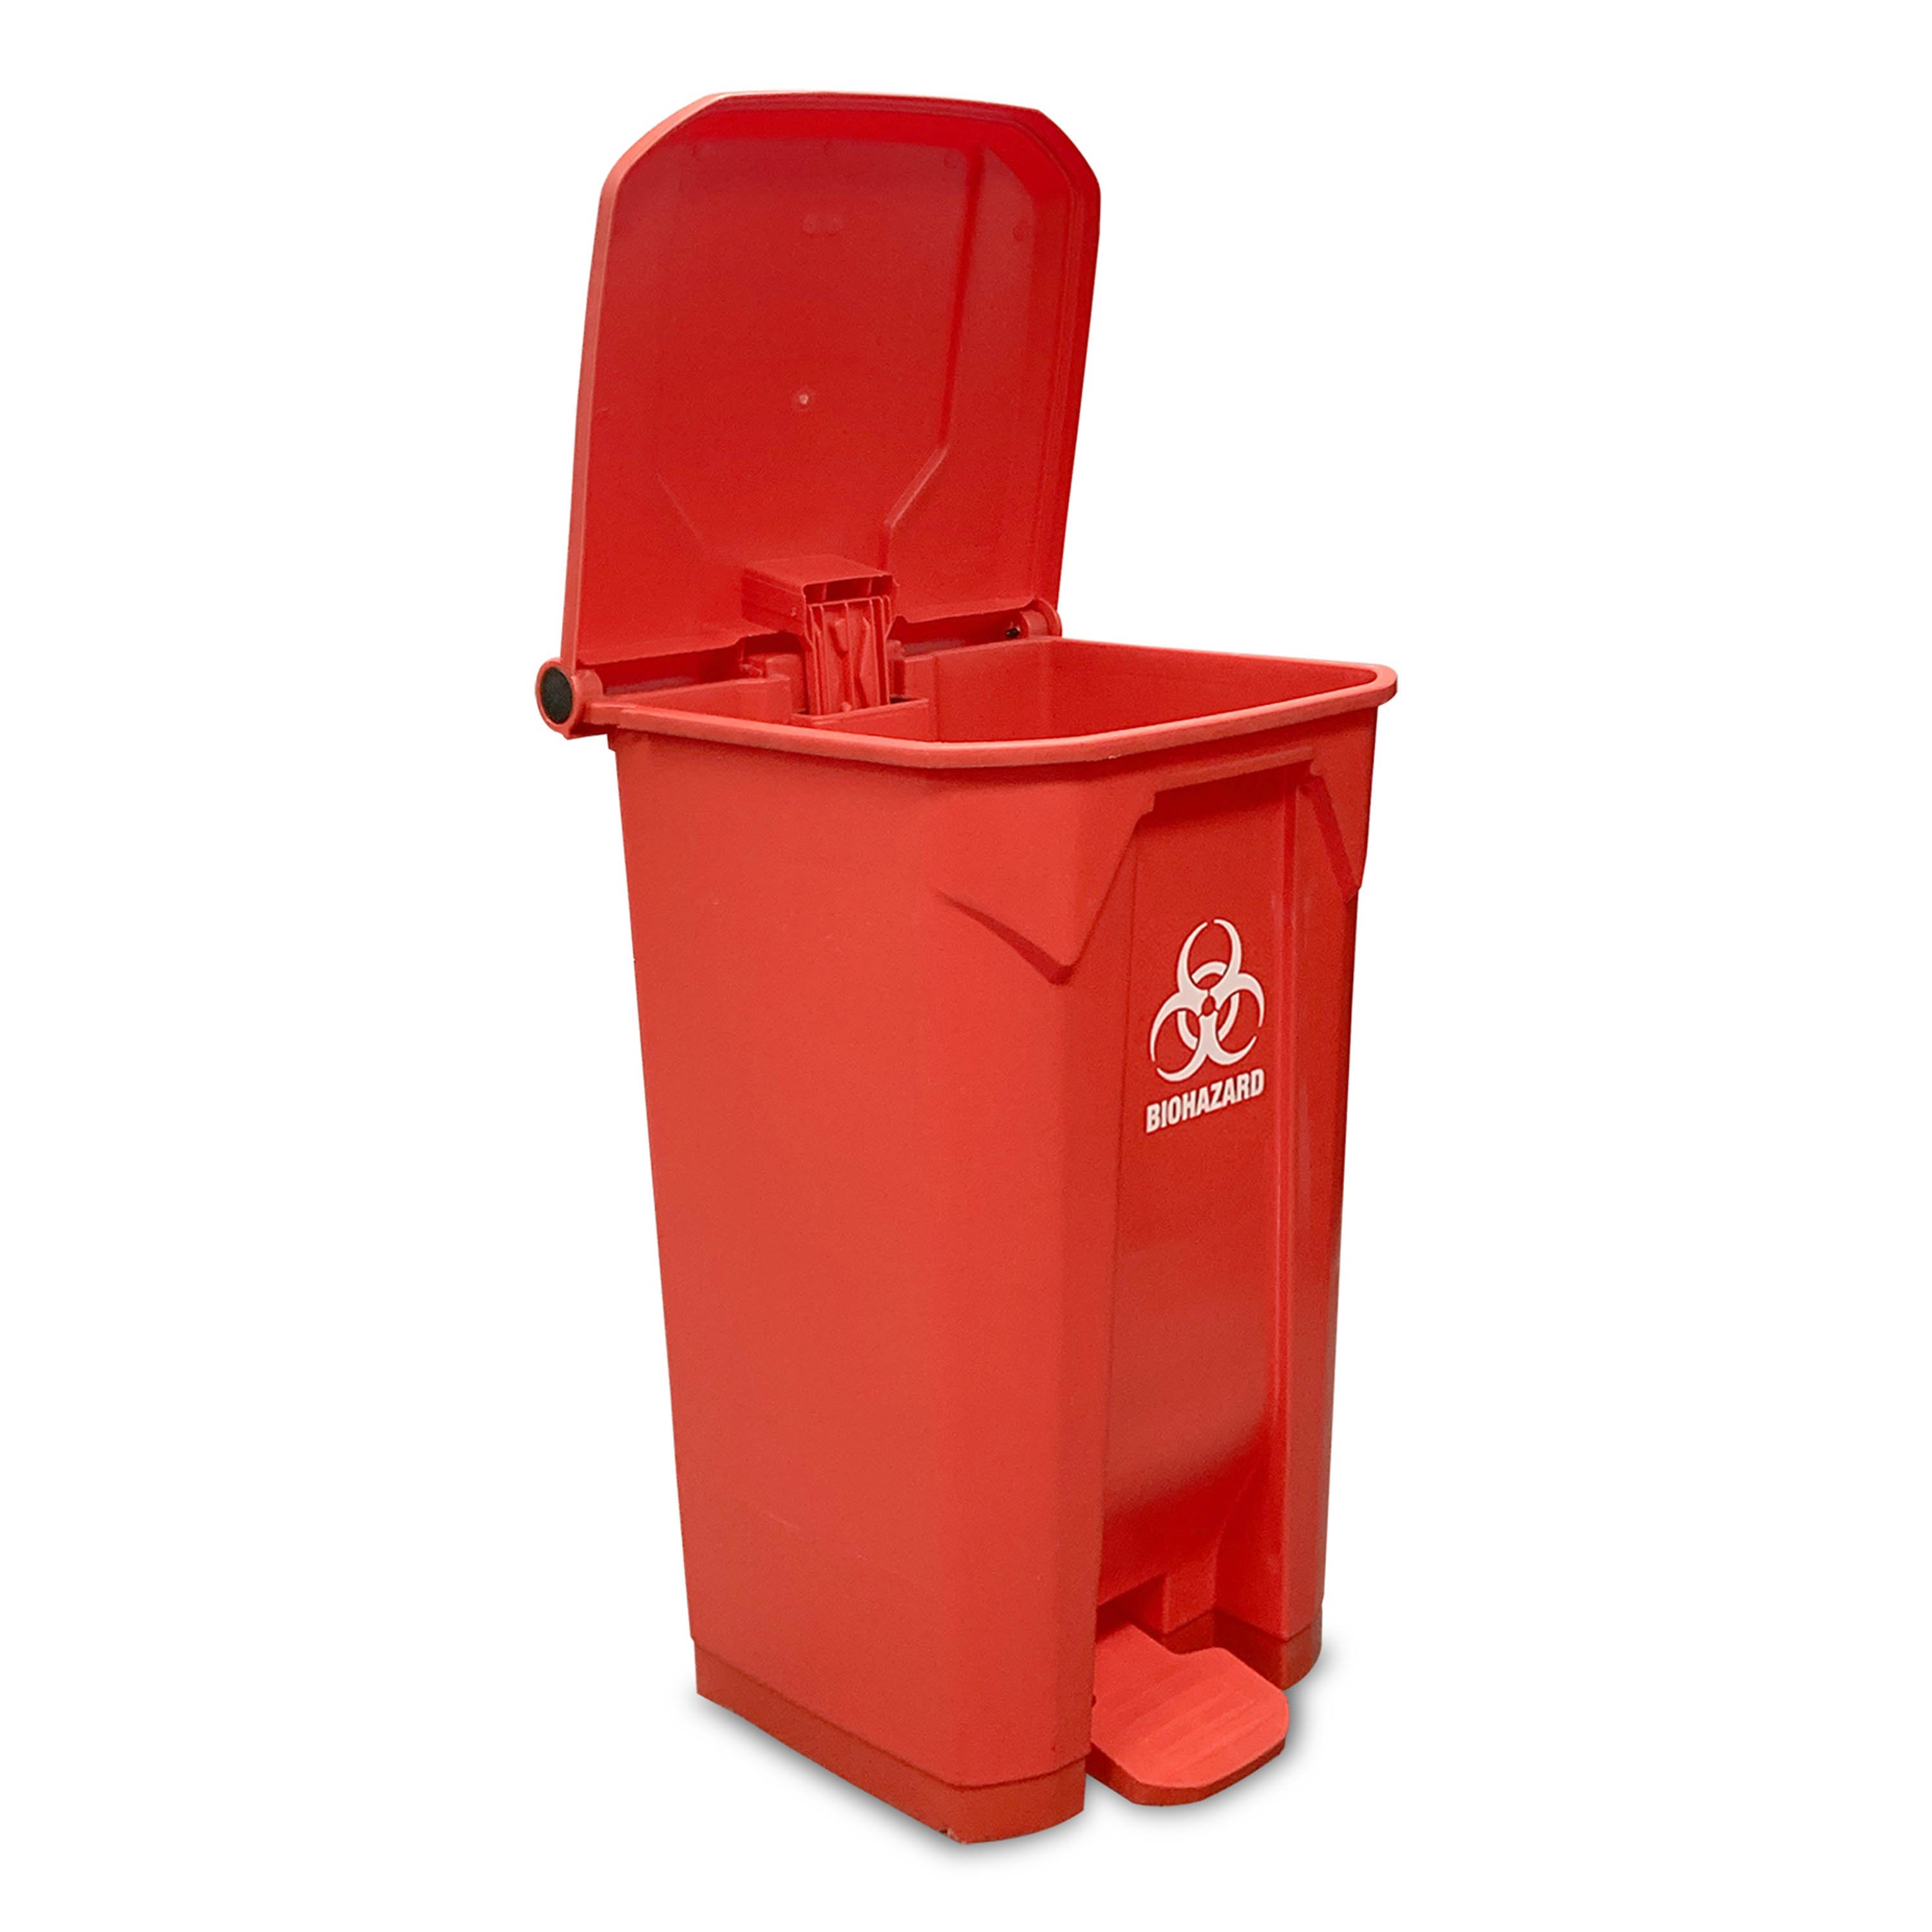 https://www.universalmedicalinc.com/media/catalog/product/cache/f176254afc5001a35a1c727280299a84/a/8/a8002b_biohazard-bin-with-hands-free-foot-pedal-and-attached-lid-23-gallon.jpg